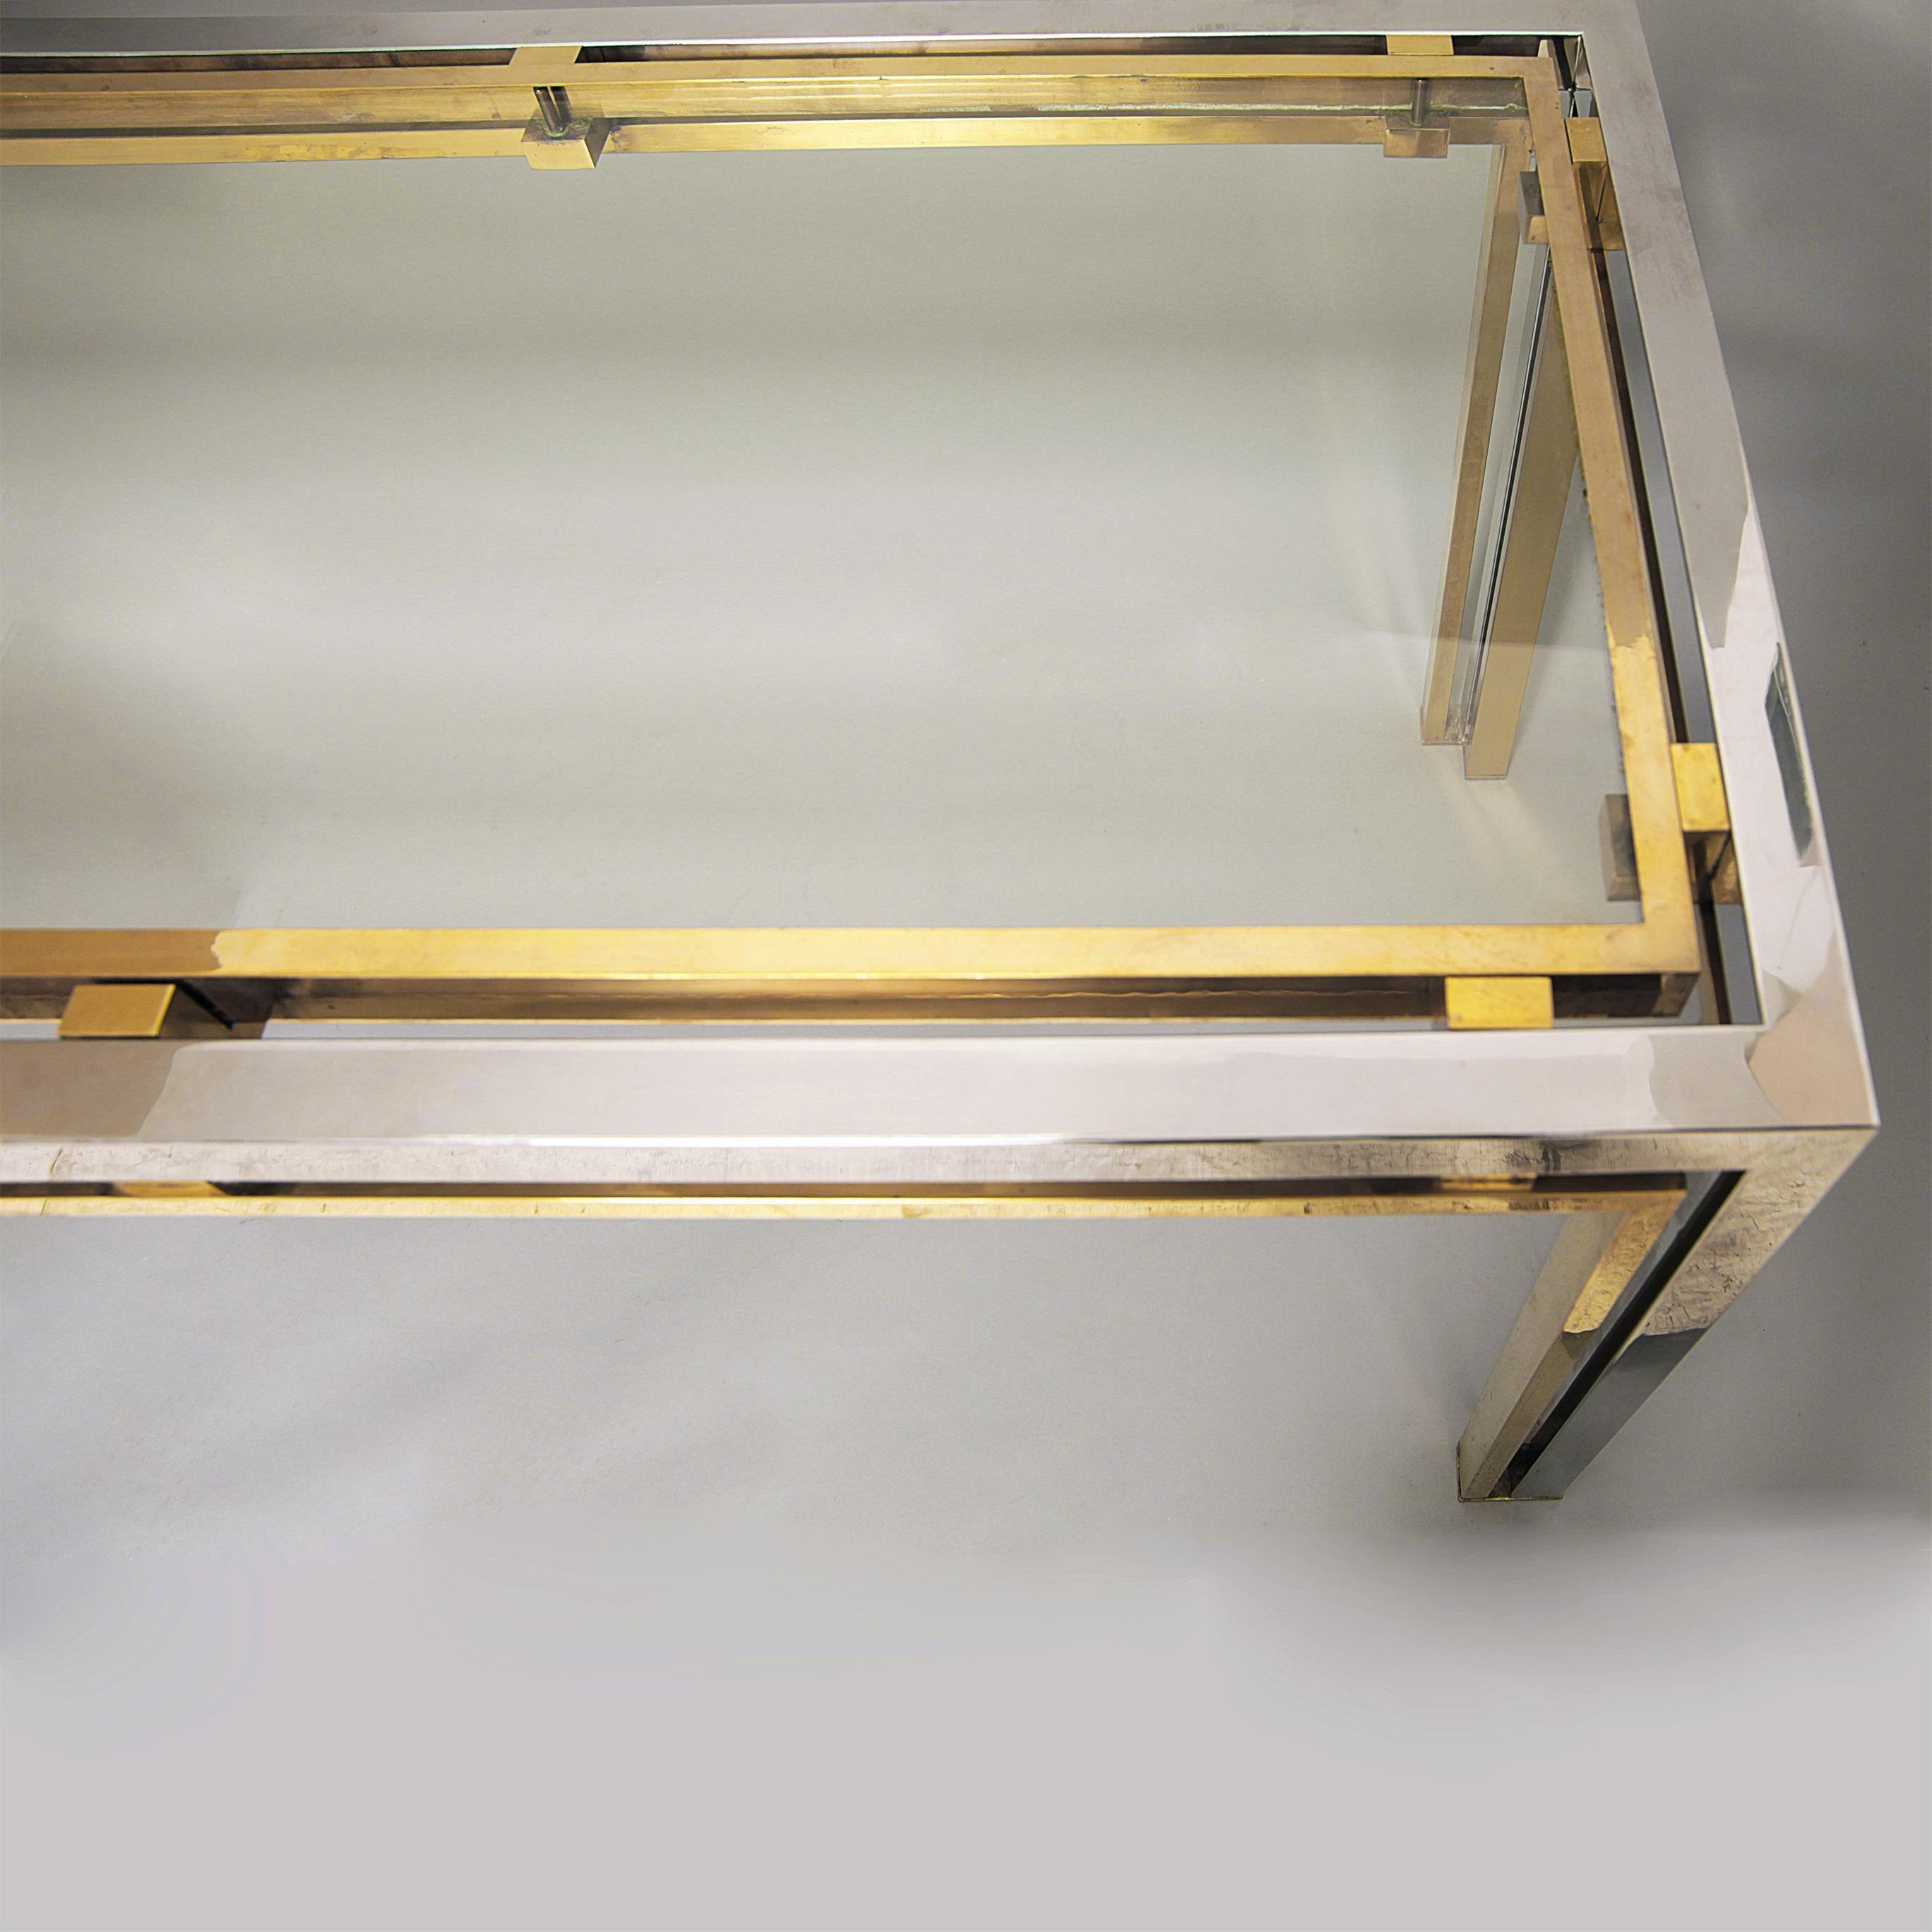 Romeo Rega Chrome and Brass with Glass Console Table, Desk or Sofa Table, 1970s (Italienisch) im Angebot